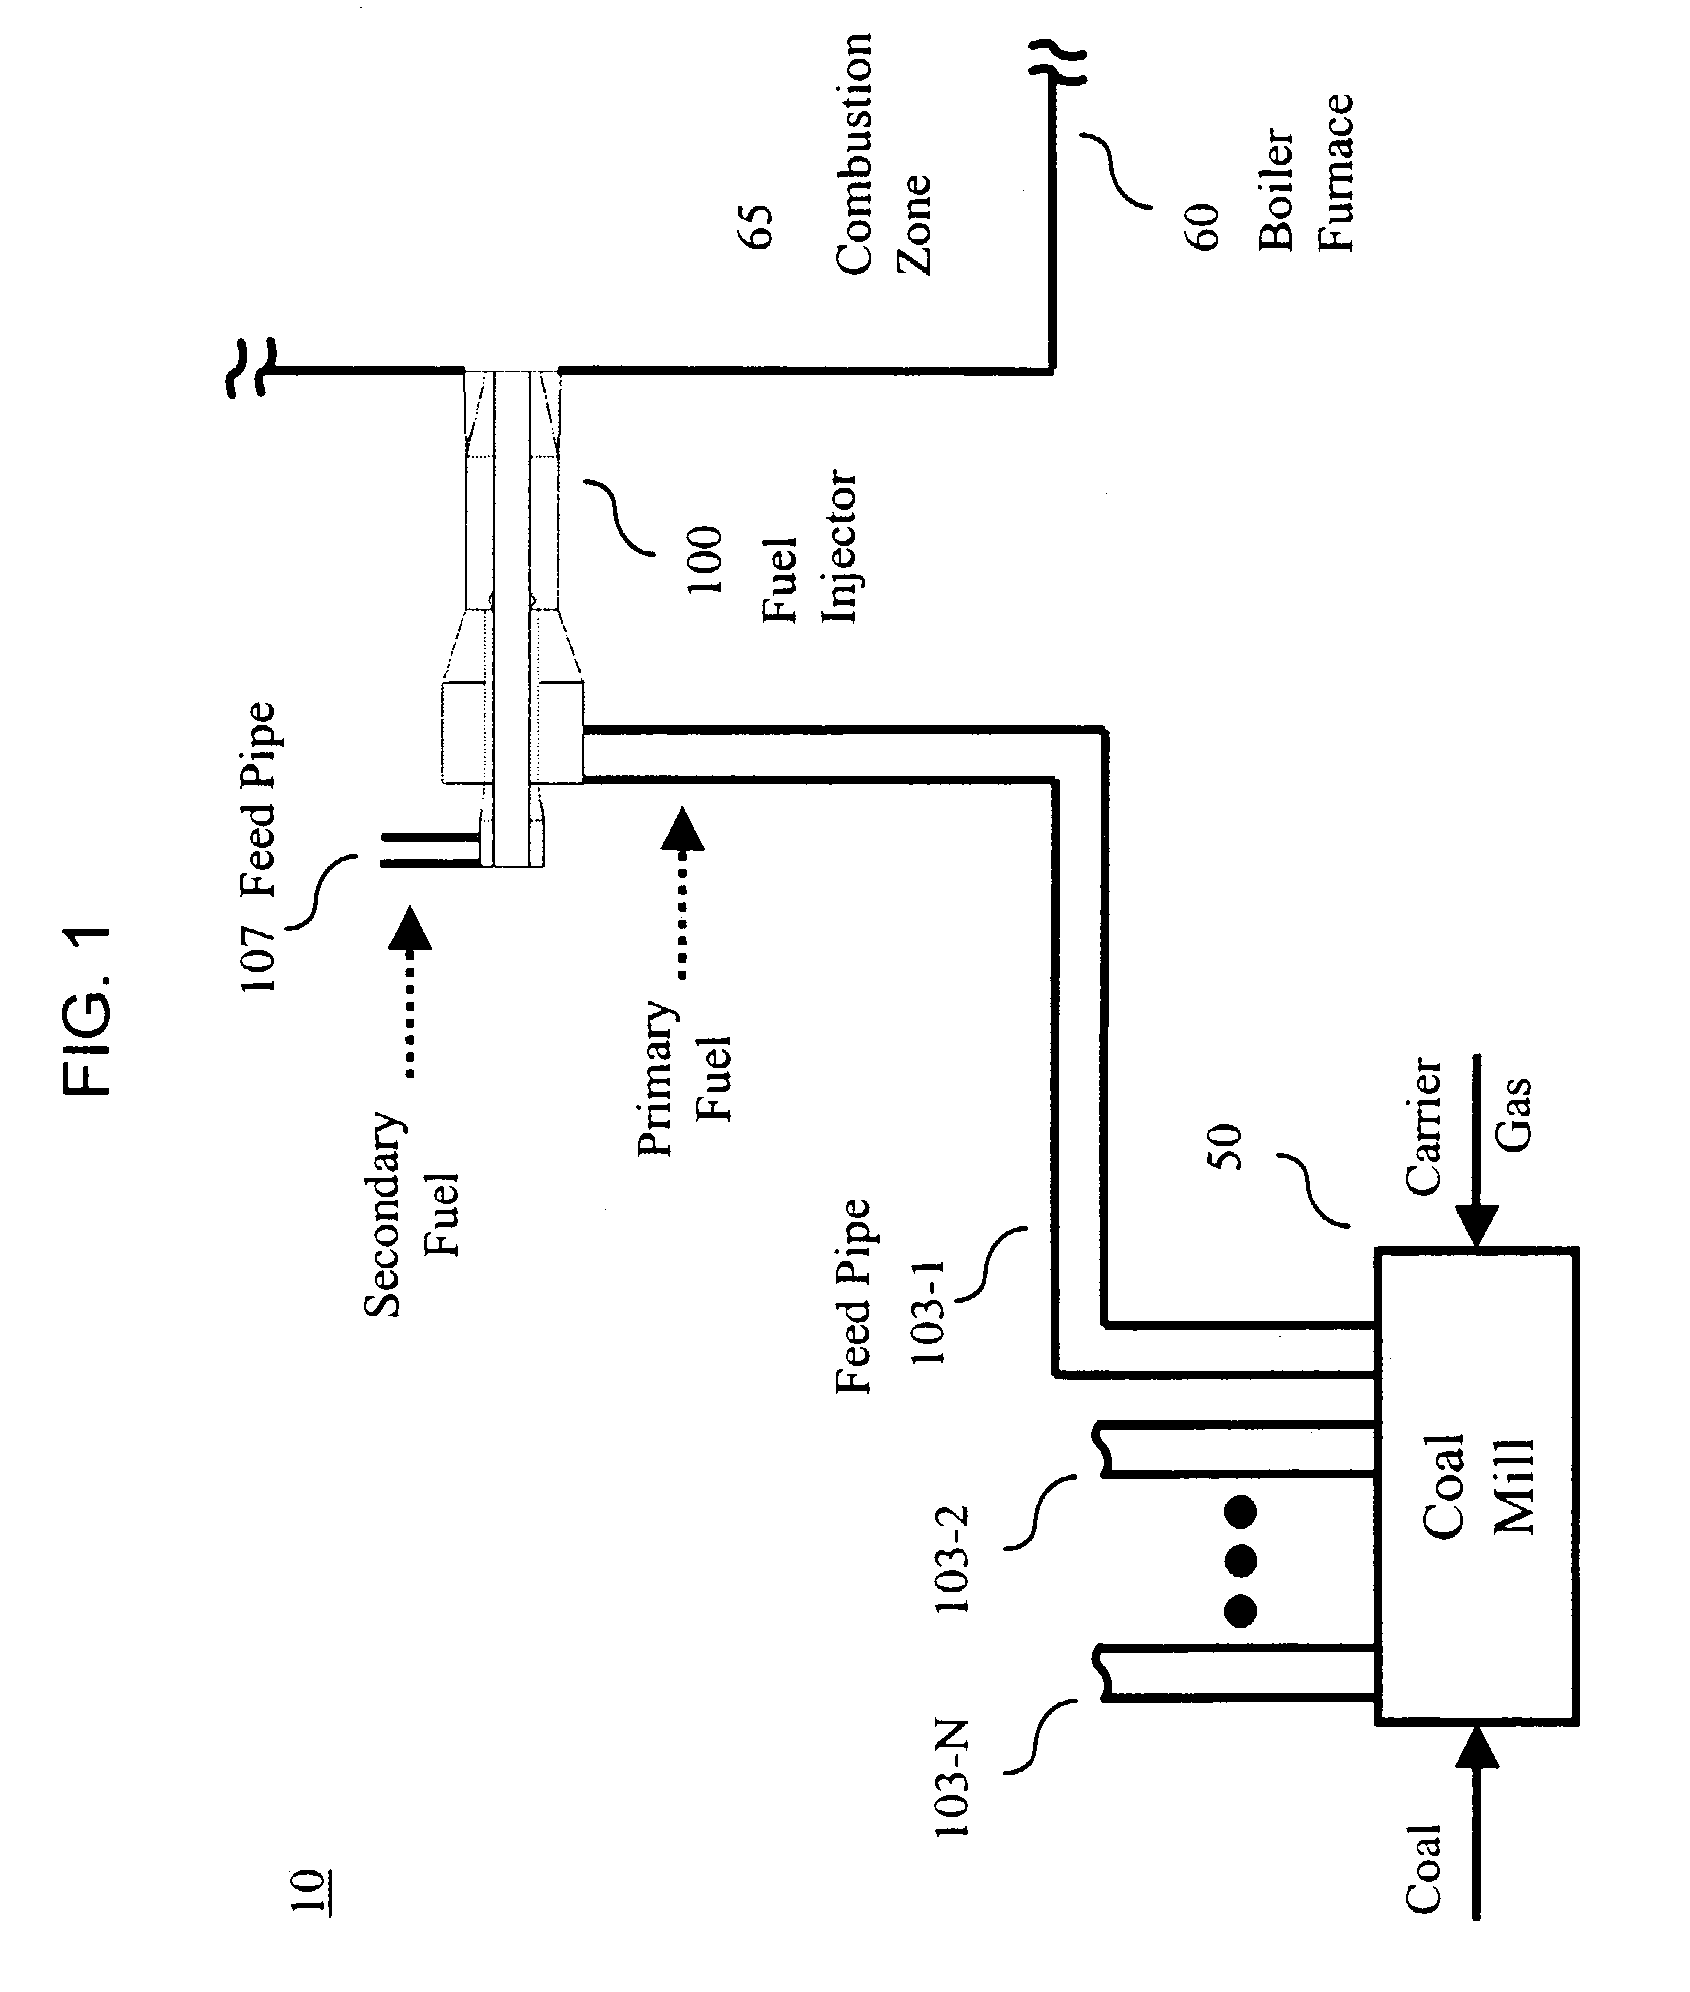 Burner system and method for mixing a plurality of solid fuels